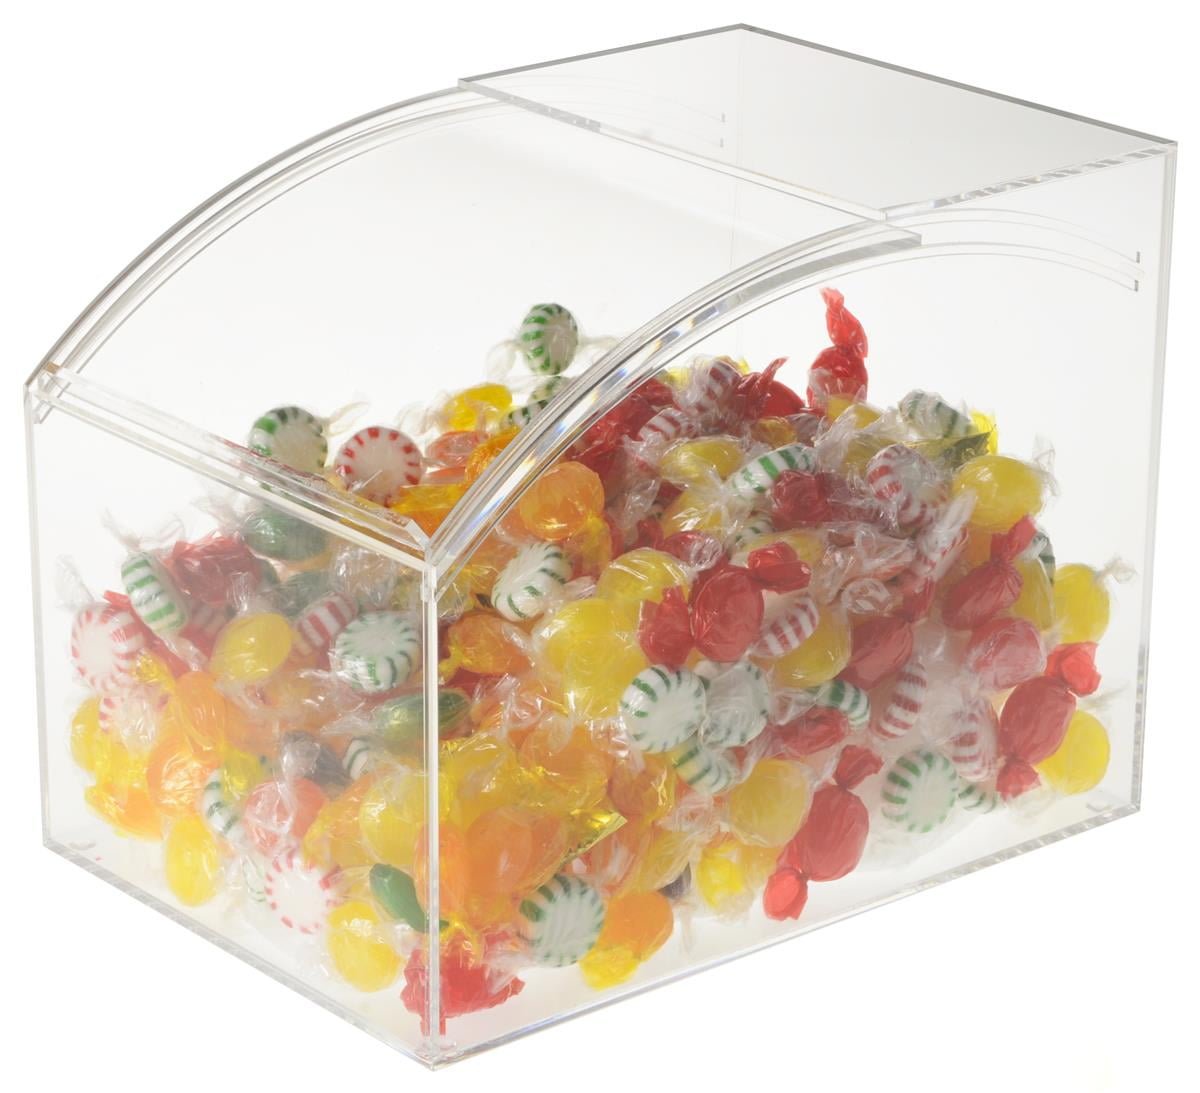 OnDisplay Acrylic 2 Compartment Retail Store Candy Dispenser - Flip Top  Storage Bin - Office/Home/Retail Store Display Organizer